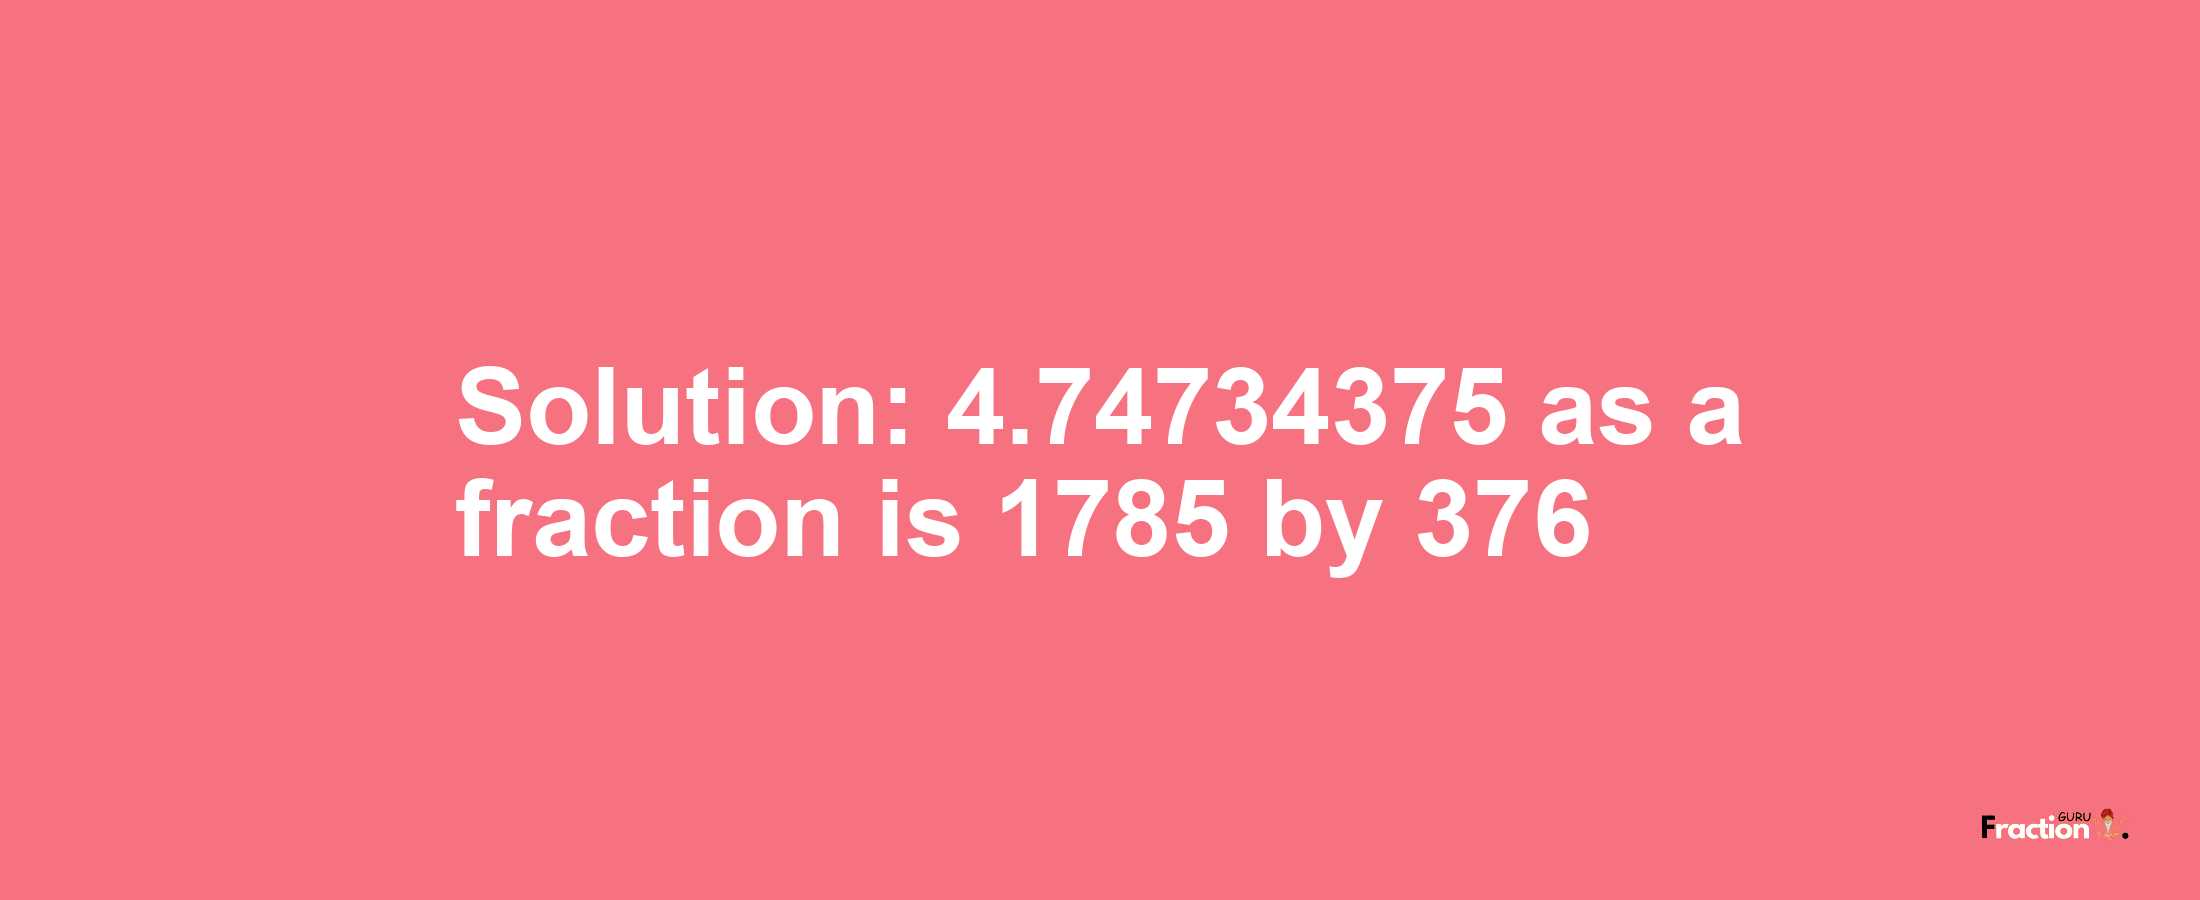 Solution:4.74734375 as a fraction is 1785/376